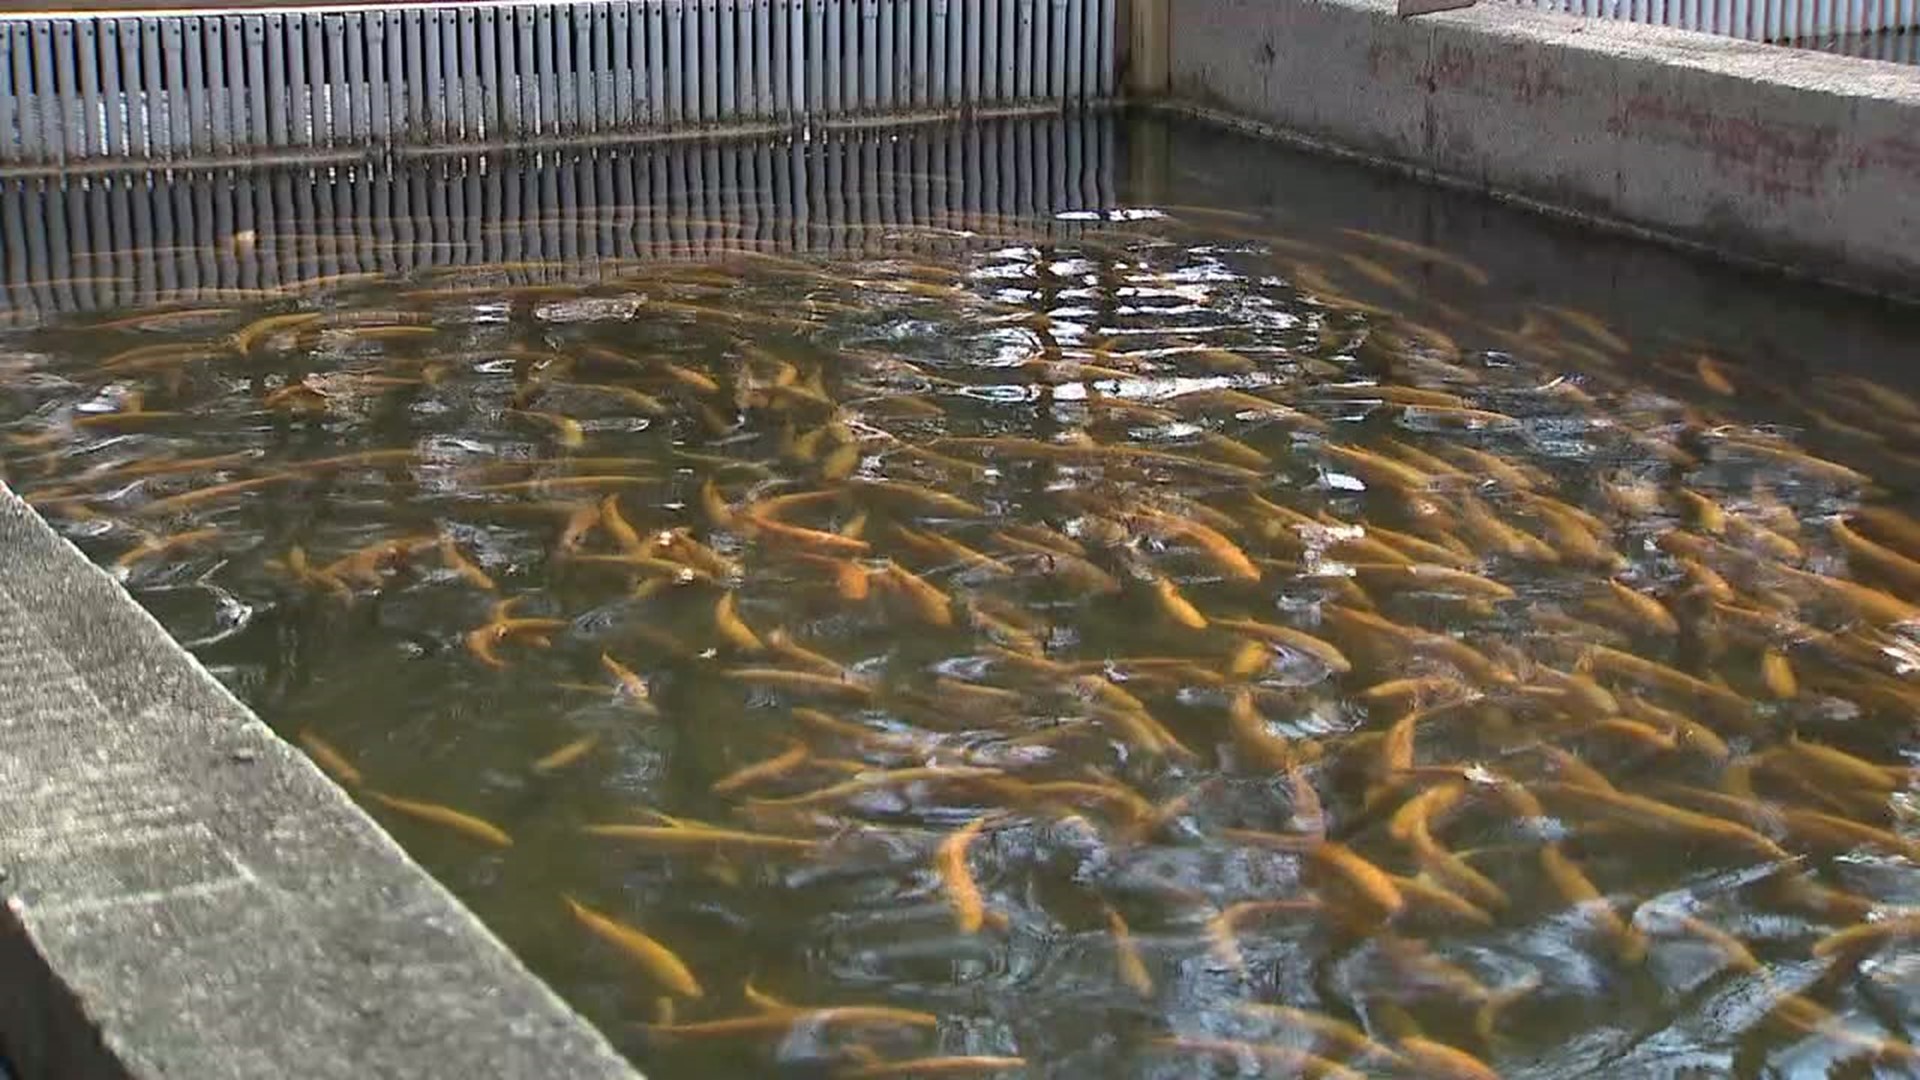 Newswatch 16's Amanda Eustice visited a hatchery in the Poconos to see what anglers can expect this season.